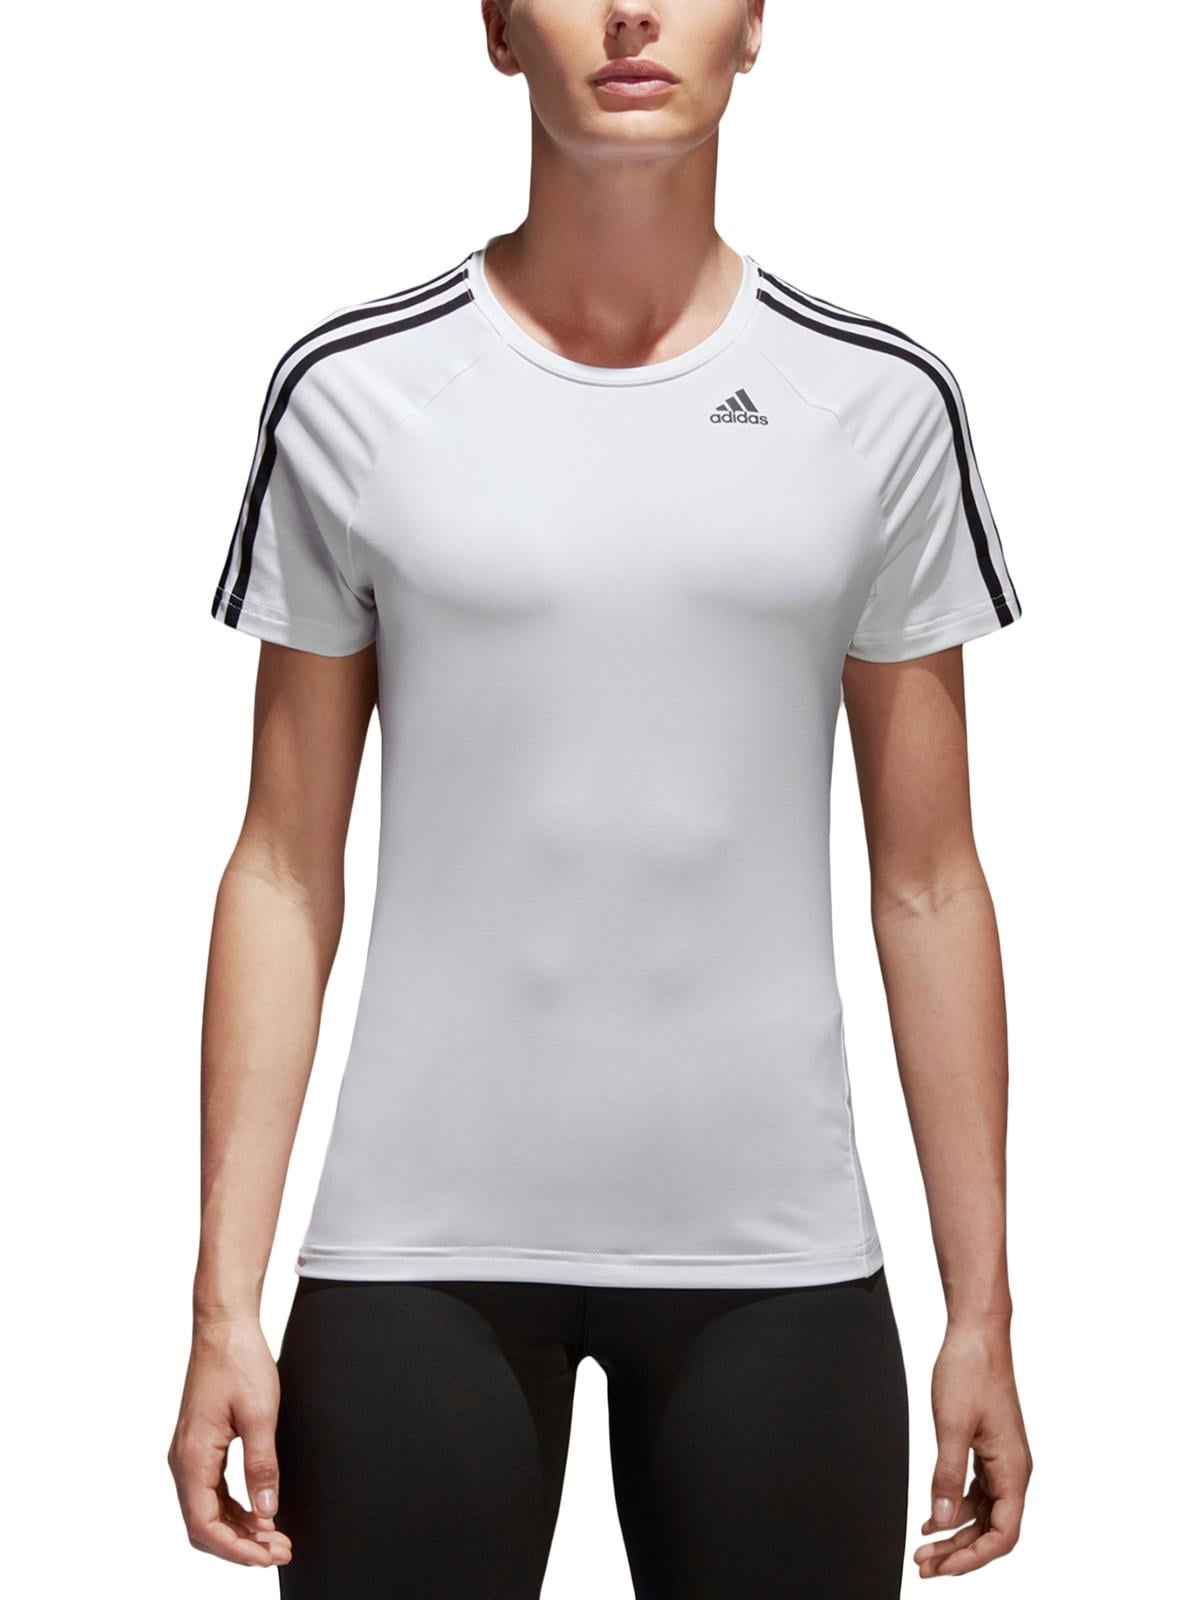 15 Minute Adidas Workout Tee for Push Pull Legs